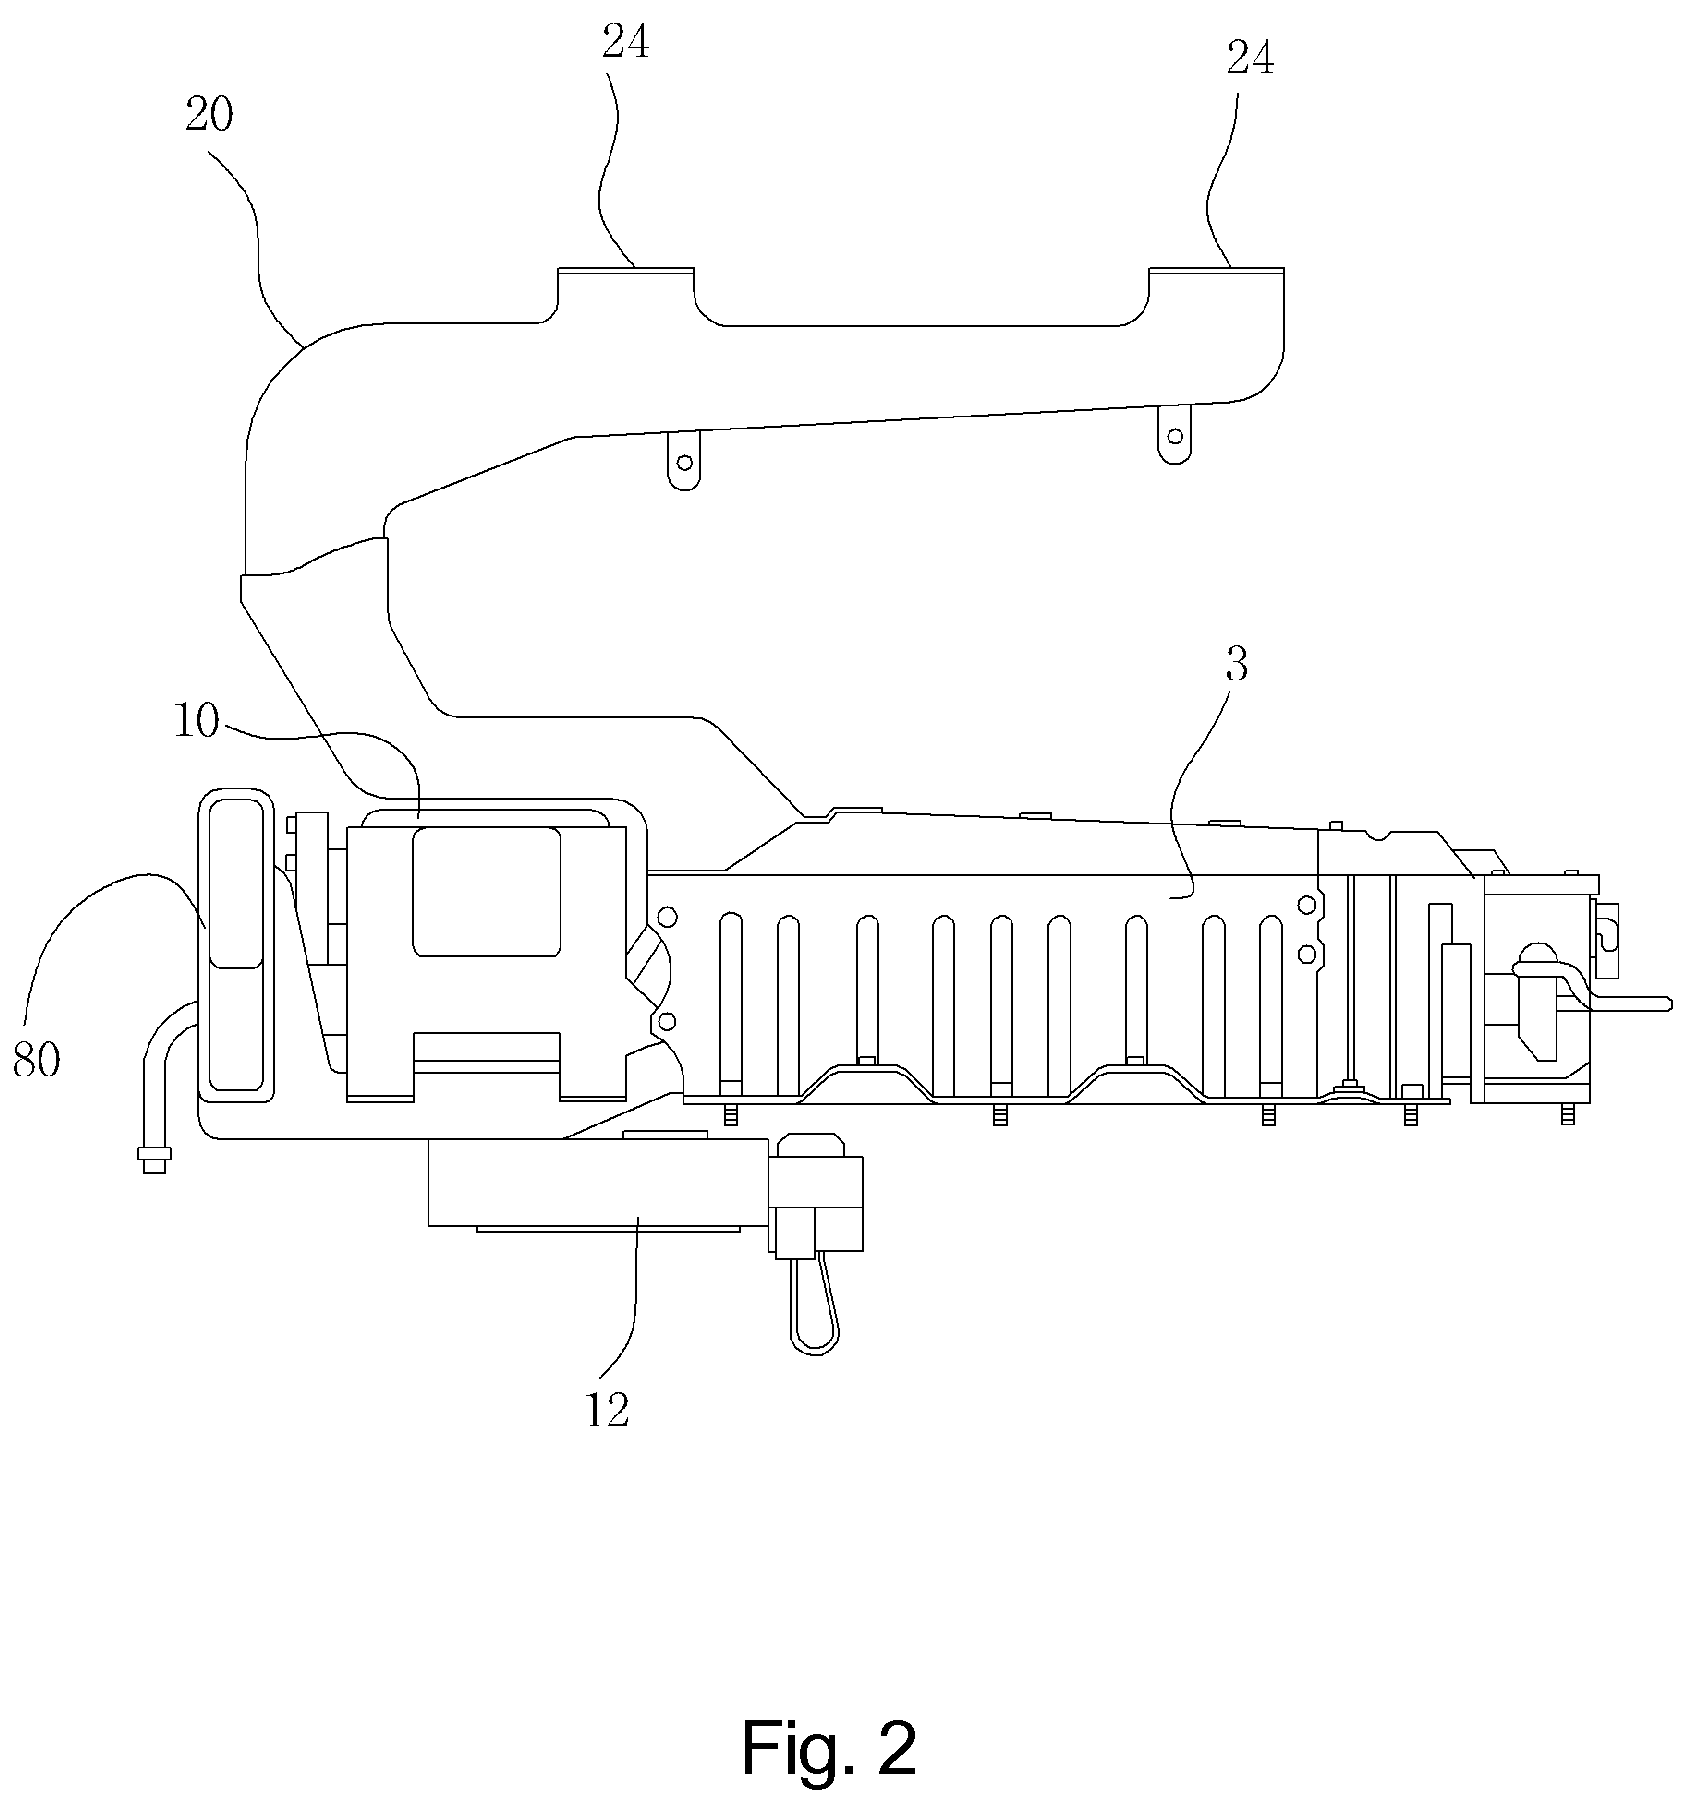 Cooling System For Hybrid Vehicles